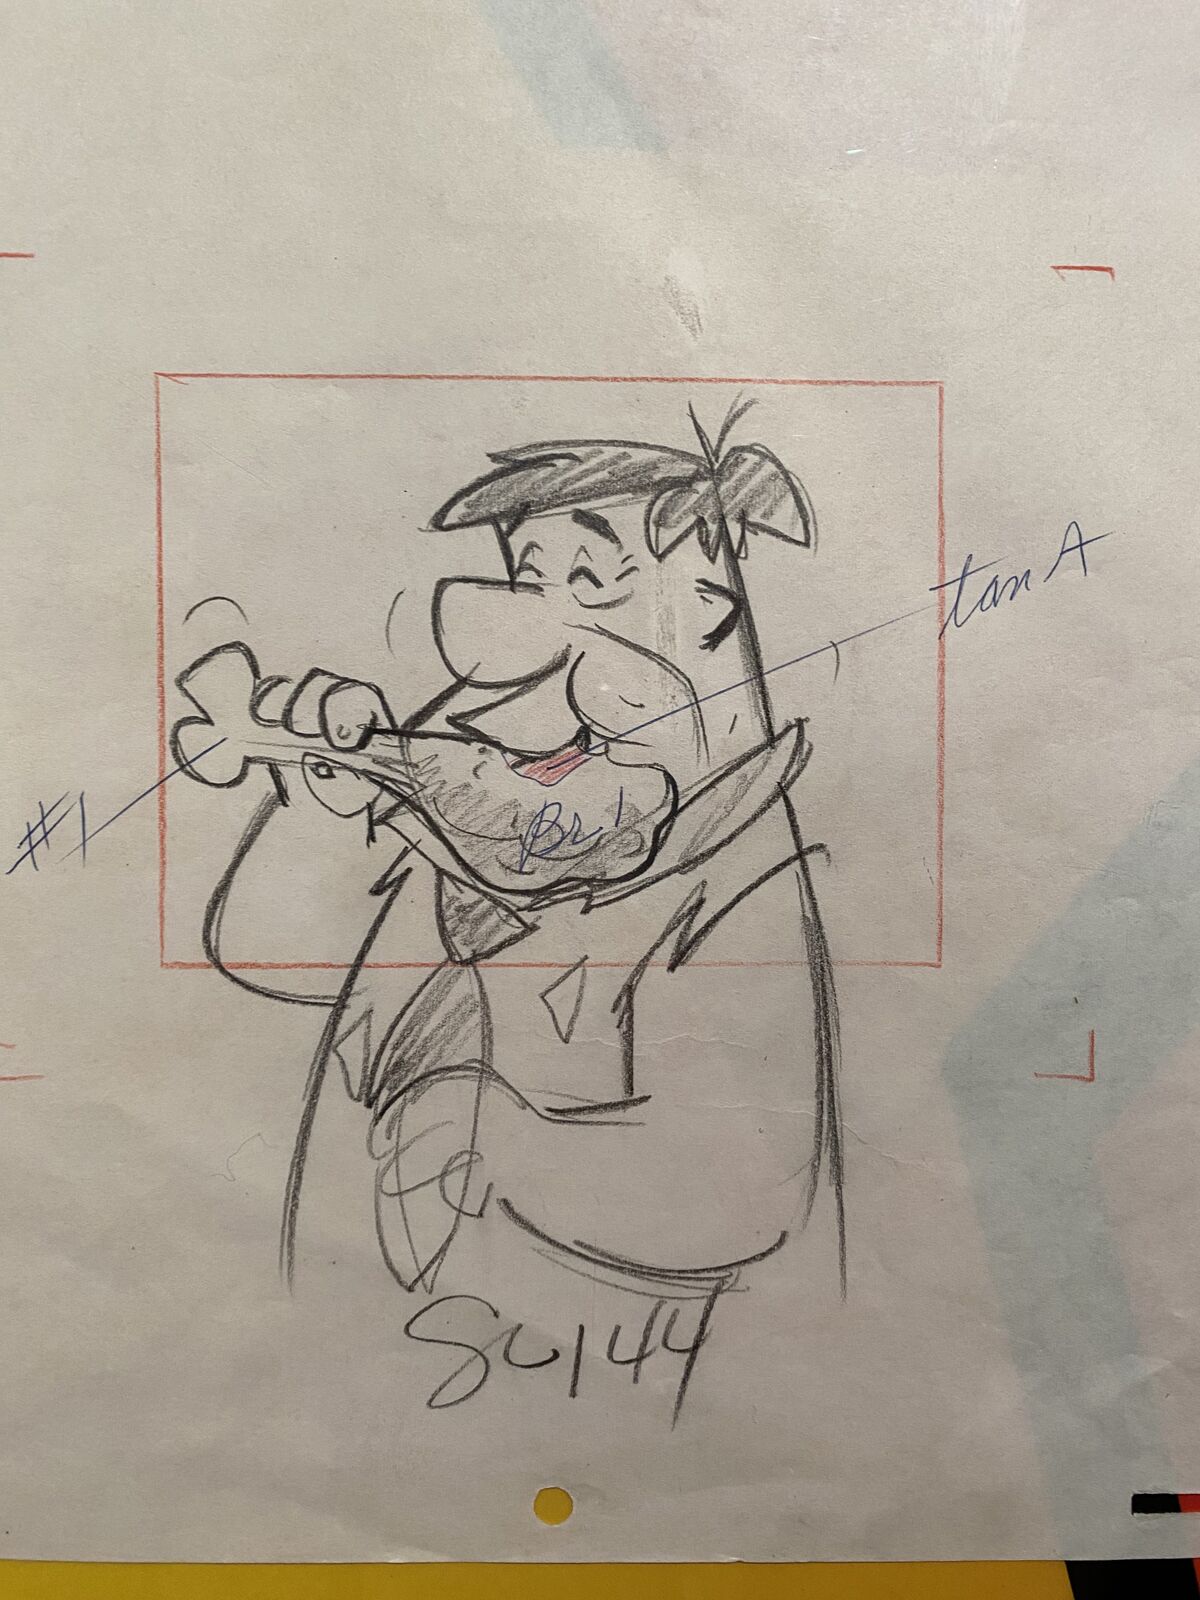 A hand drawing of the animated cartoon character Fred Flintstone.  